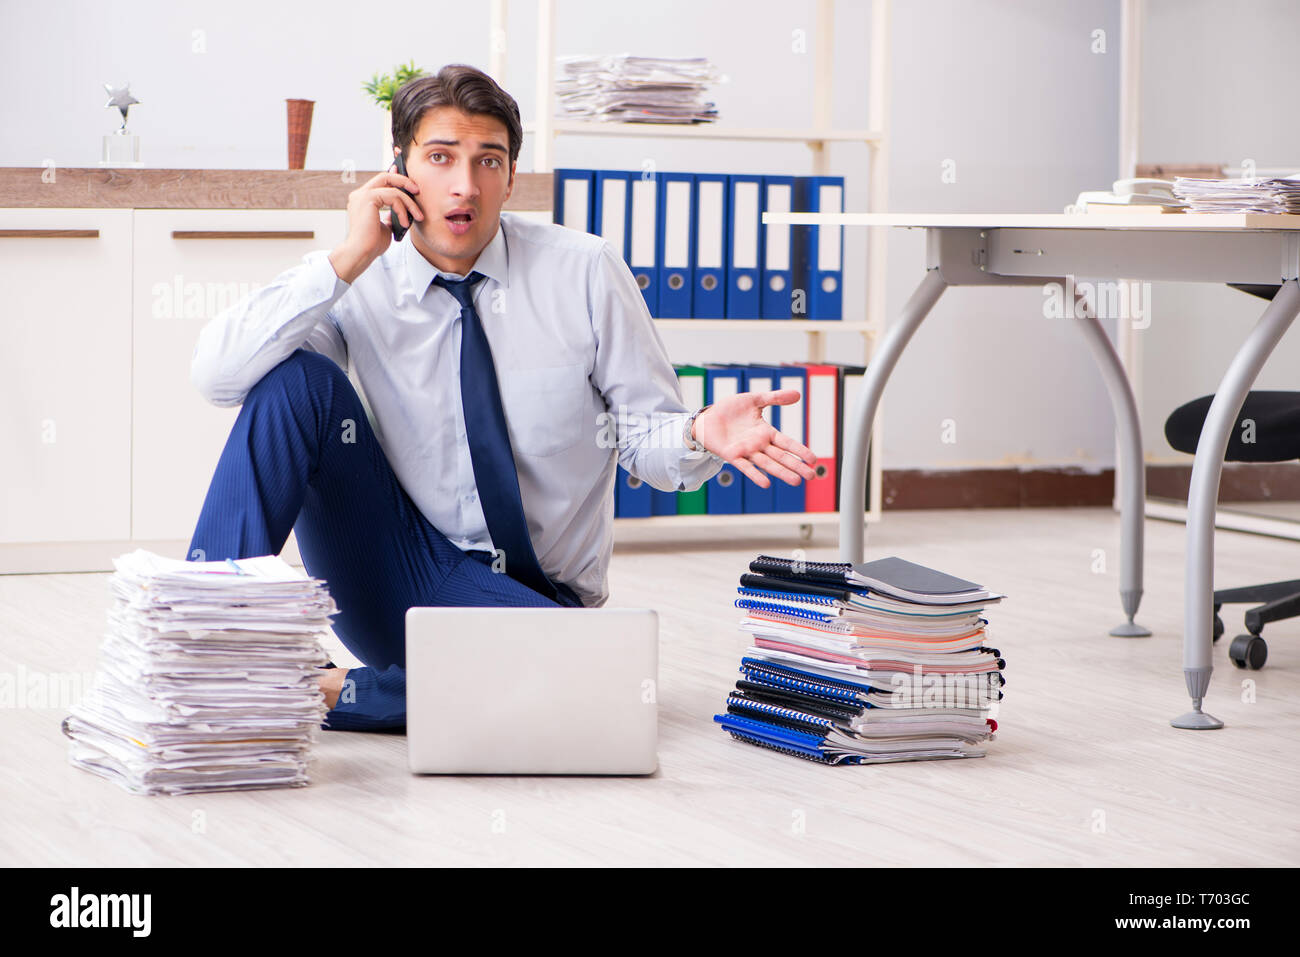 Extremely busy employee working in the office Stock Photo